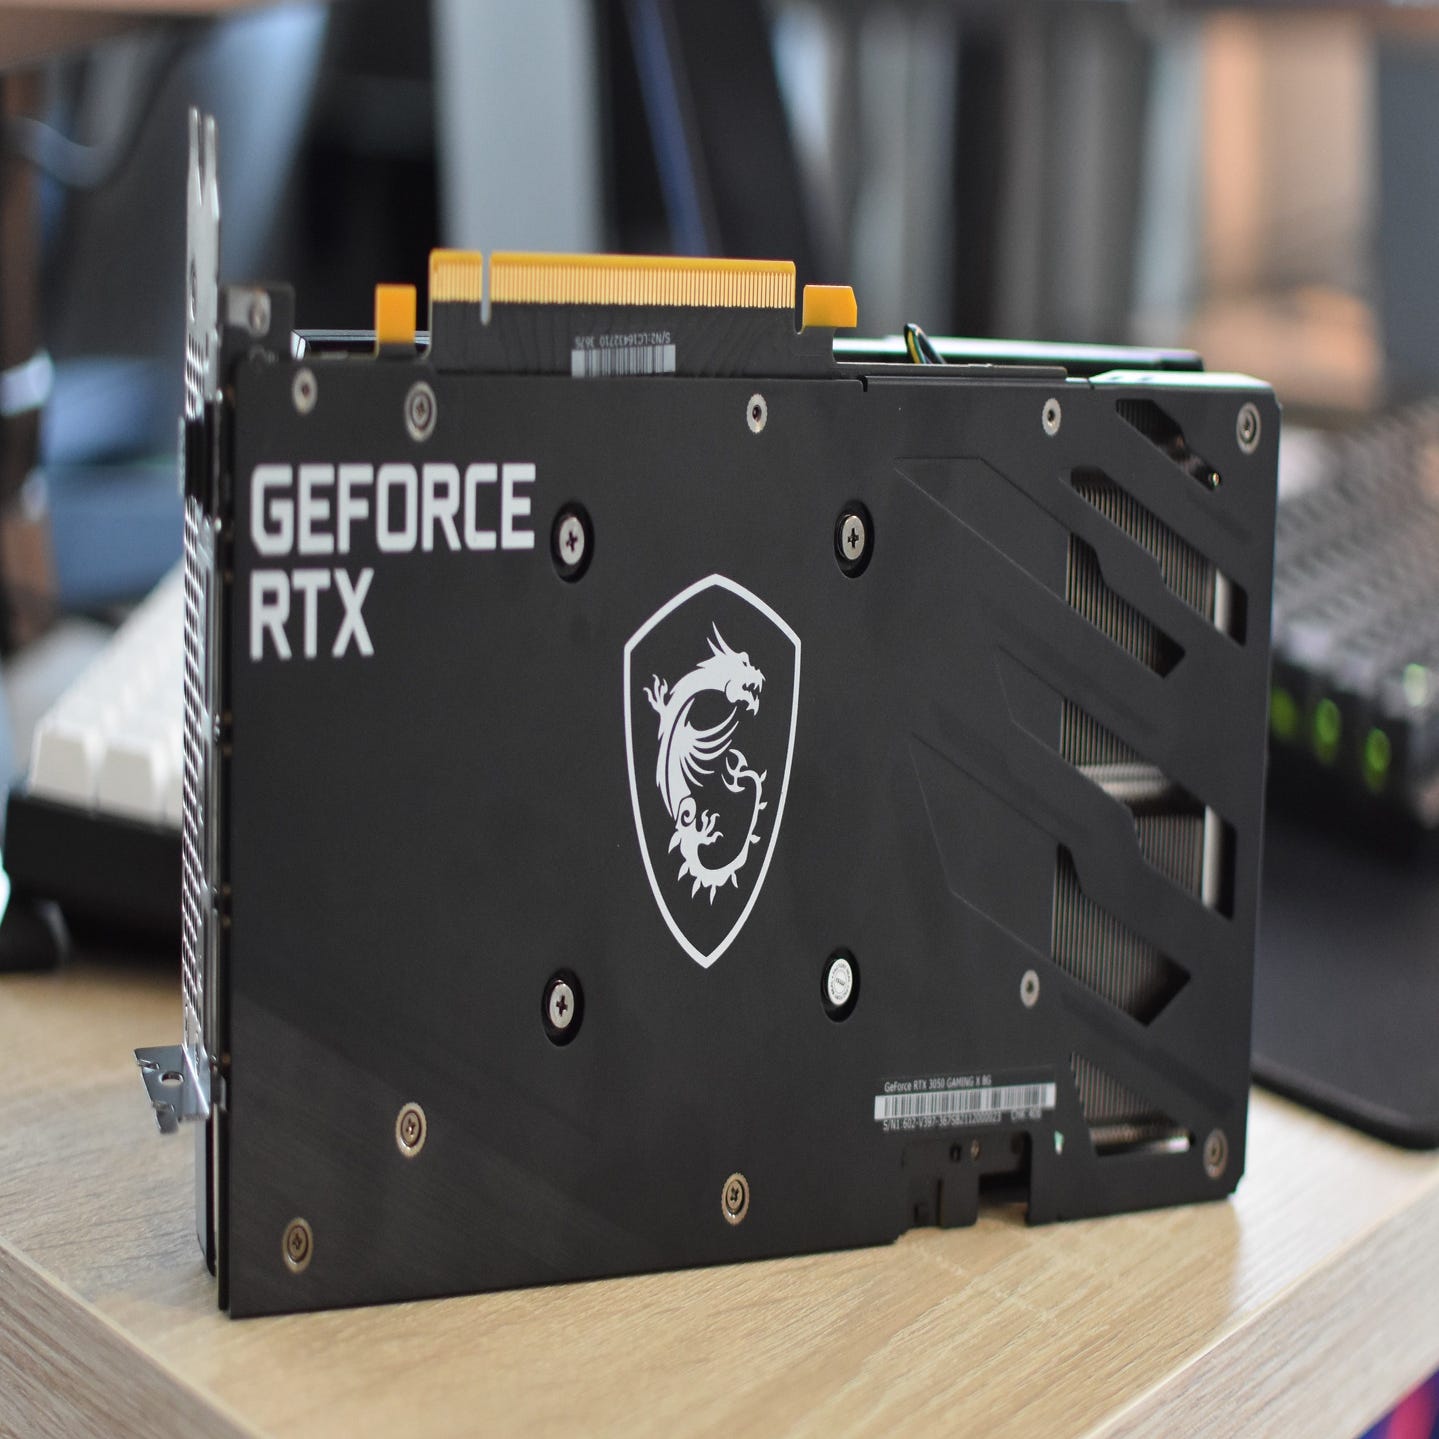 Nvidia RTX 3050 review: For an overpriced 1080p GPU, this could've